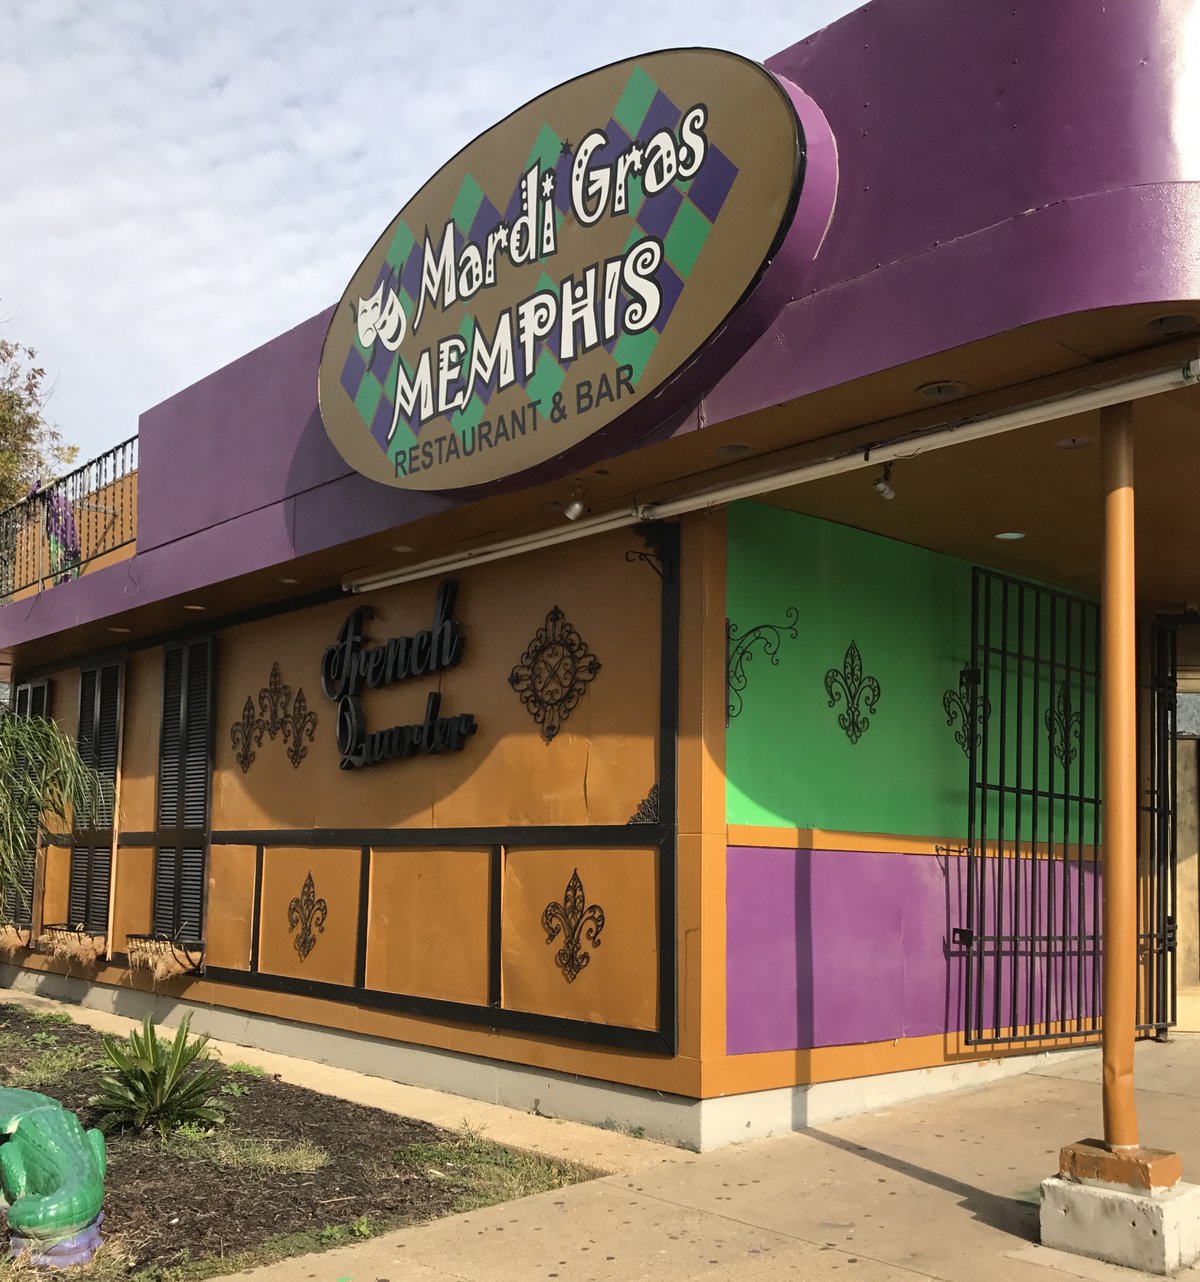 Ready for Cajun? Try Authentic Dishes at Mardi Gras Memphis Memphis